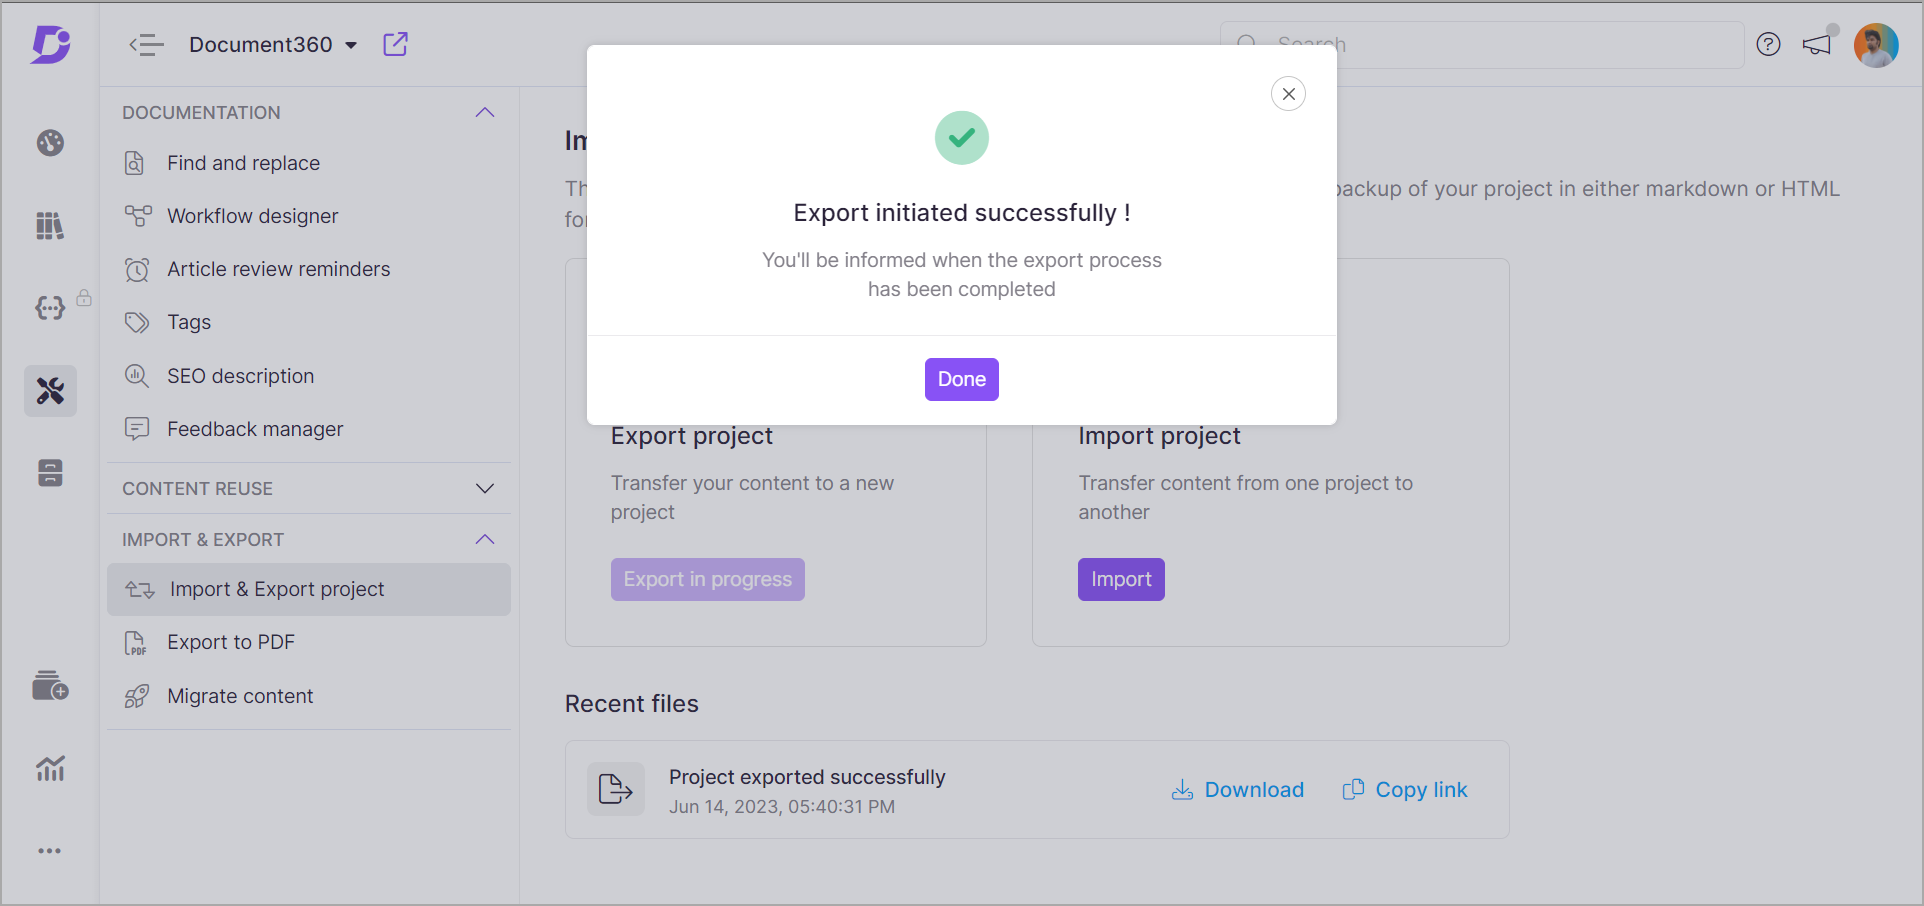 4_Screenshot-Import_and_Export_projects-Export_initiated_successfully